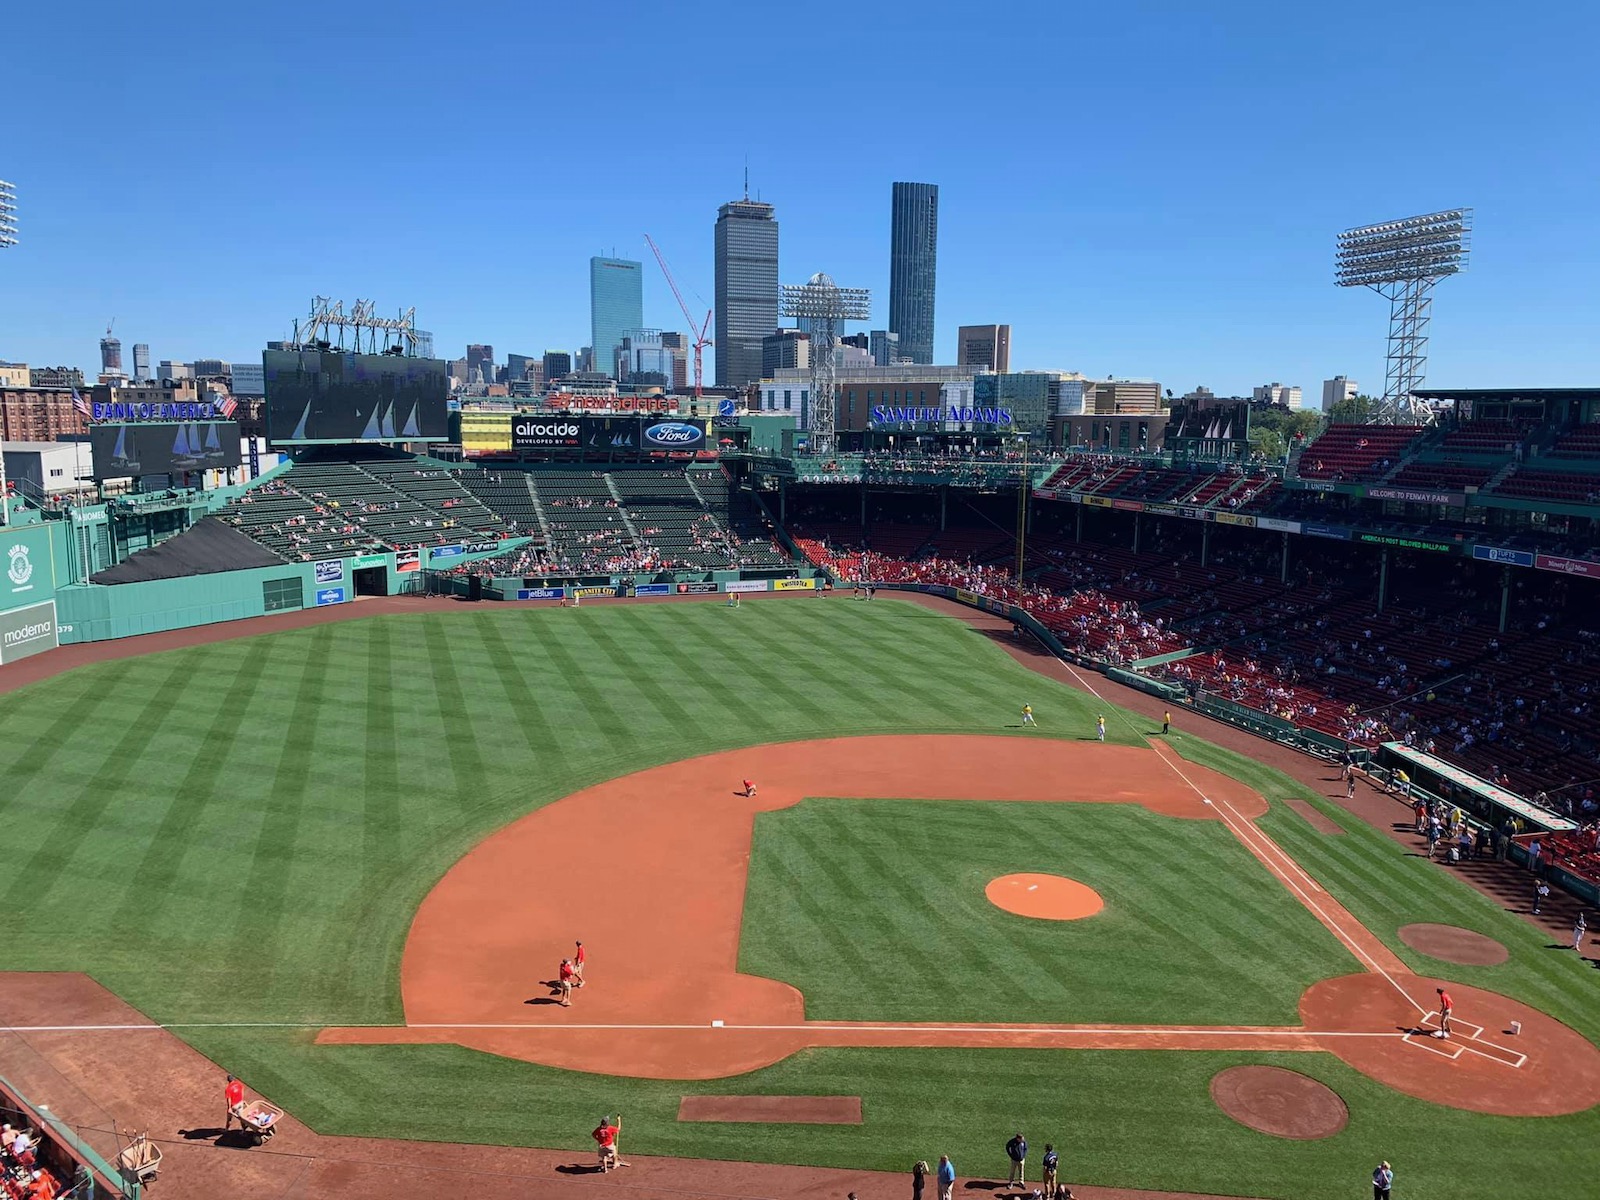 The Best Day at Fenway Park